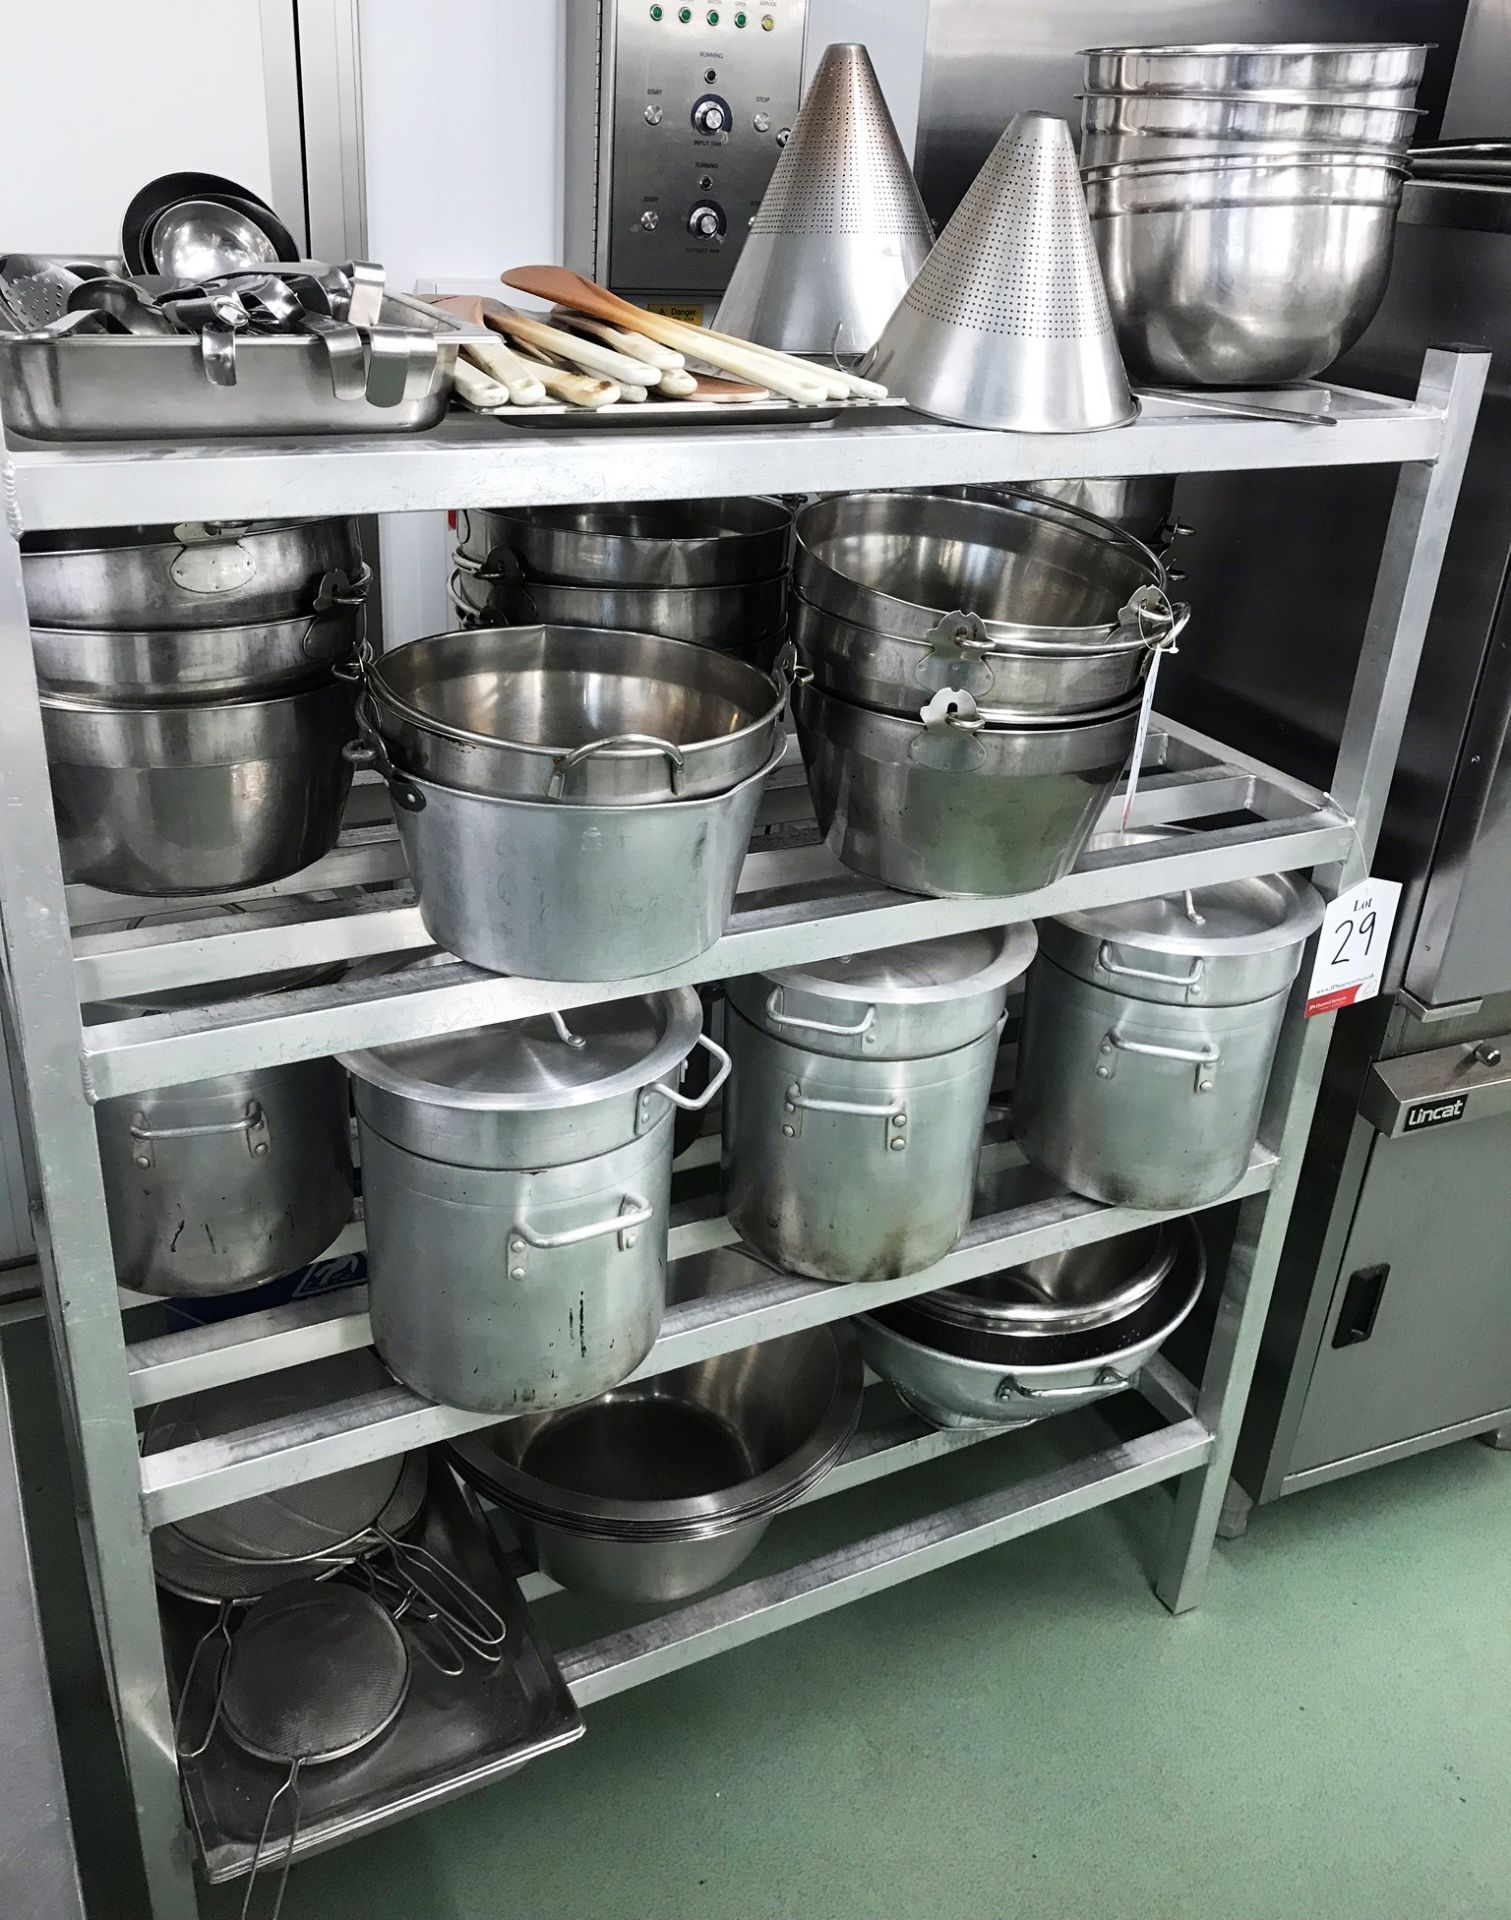 Quantity Of Various Commercial Pots | Pans | Bowls | Ladles - As Pictured | RACK NOT INCLUDED - Image 6 of 6